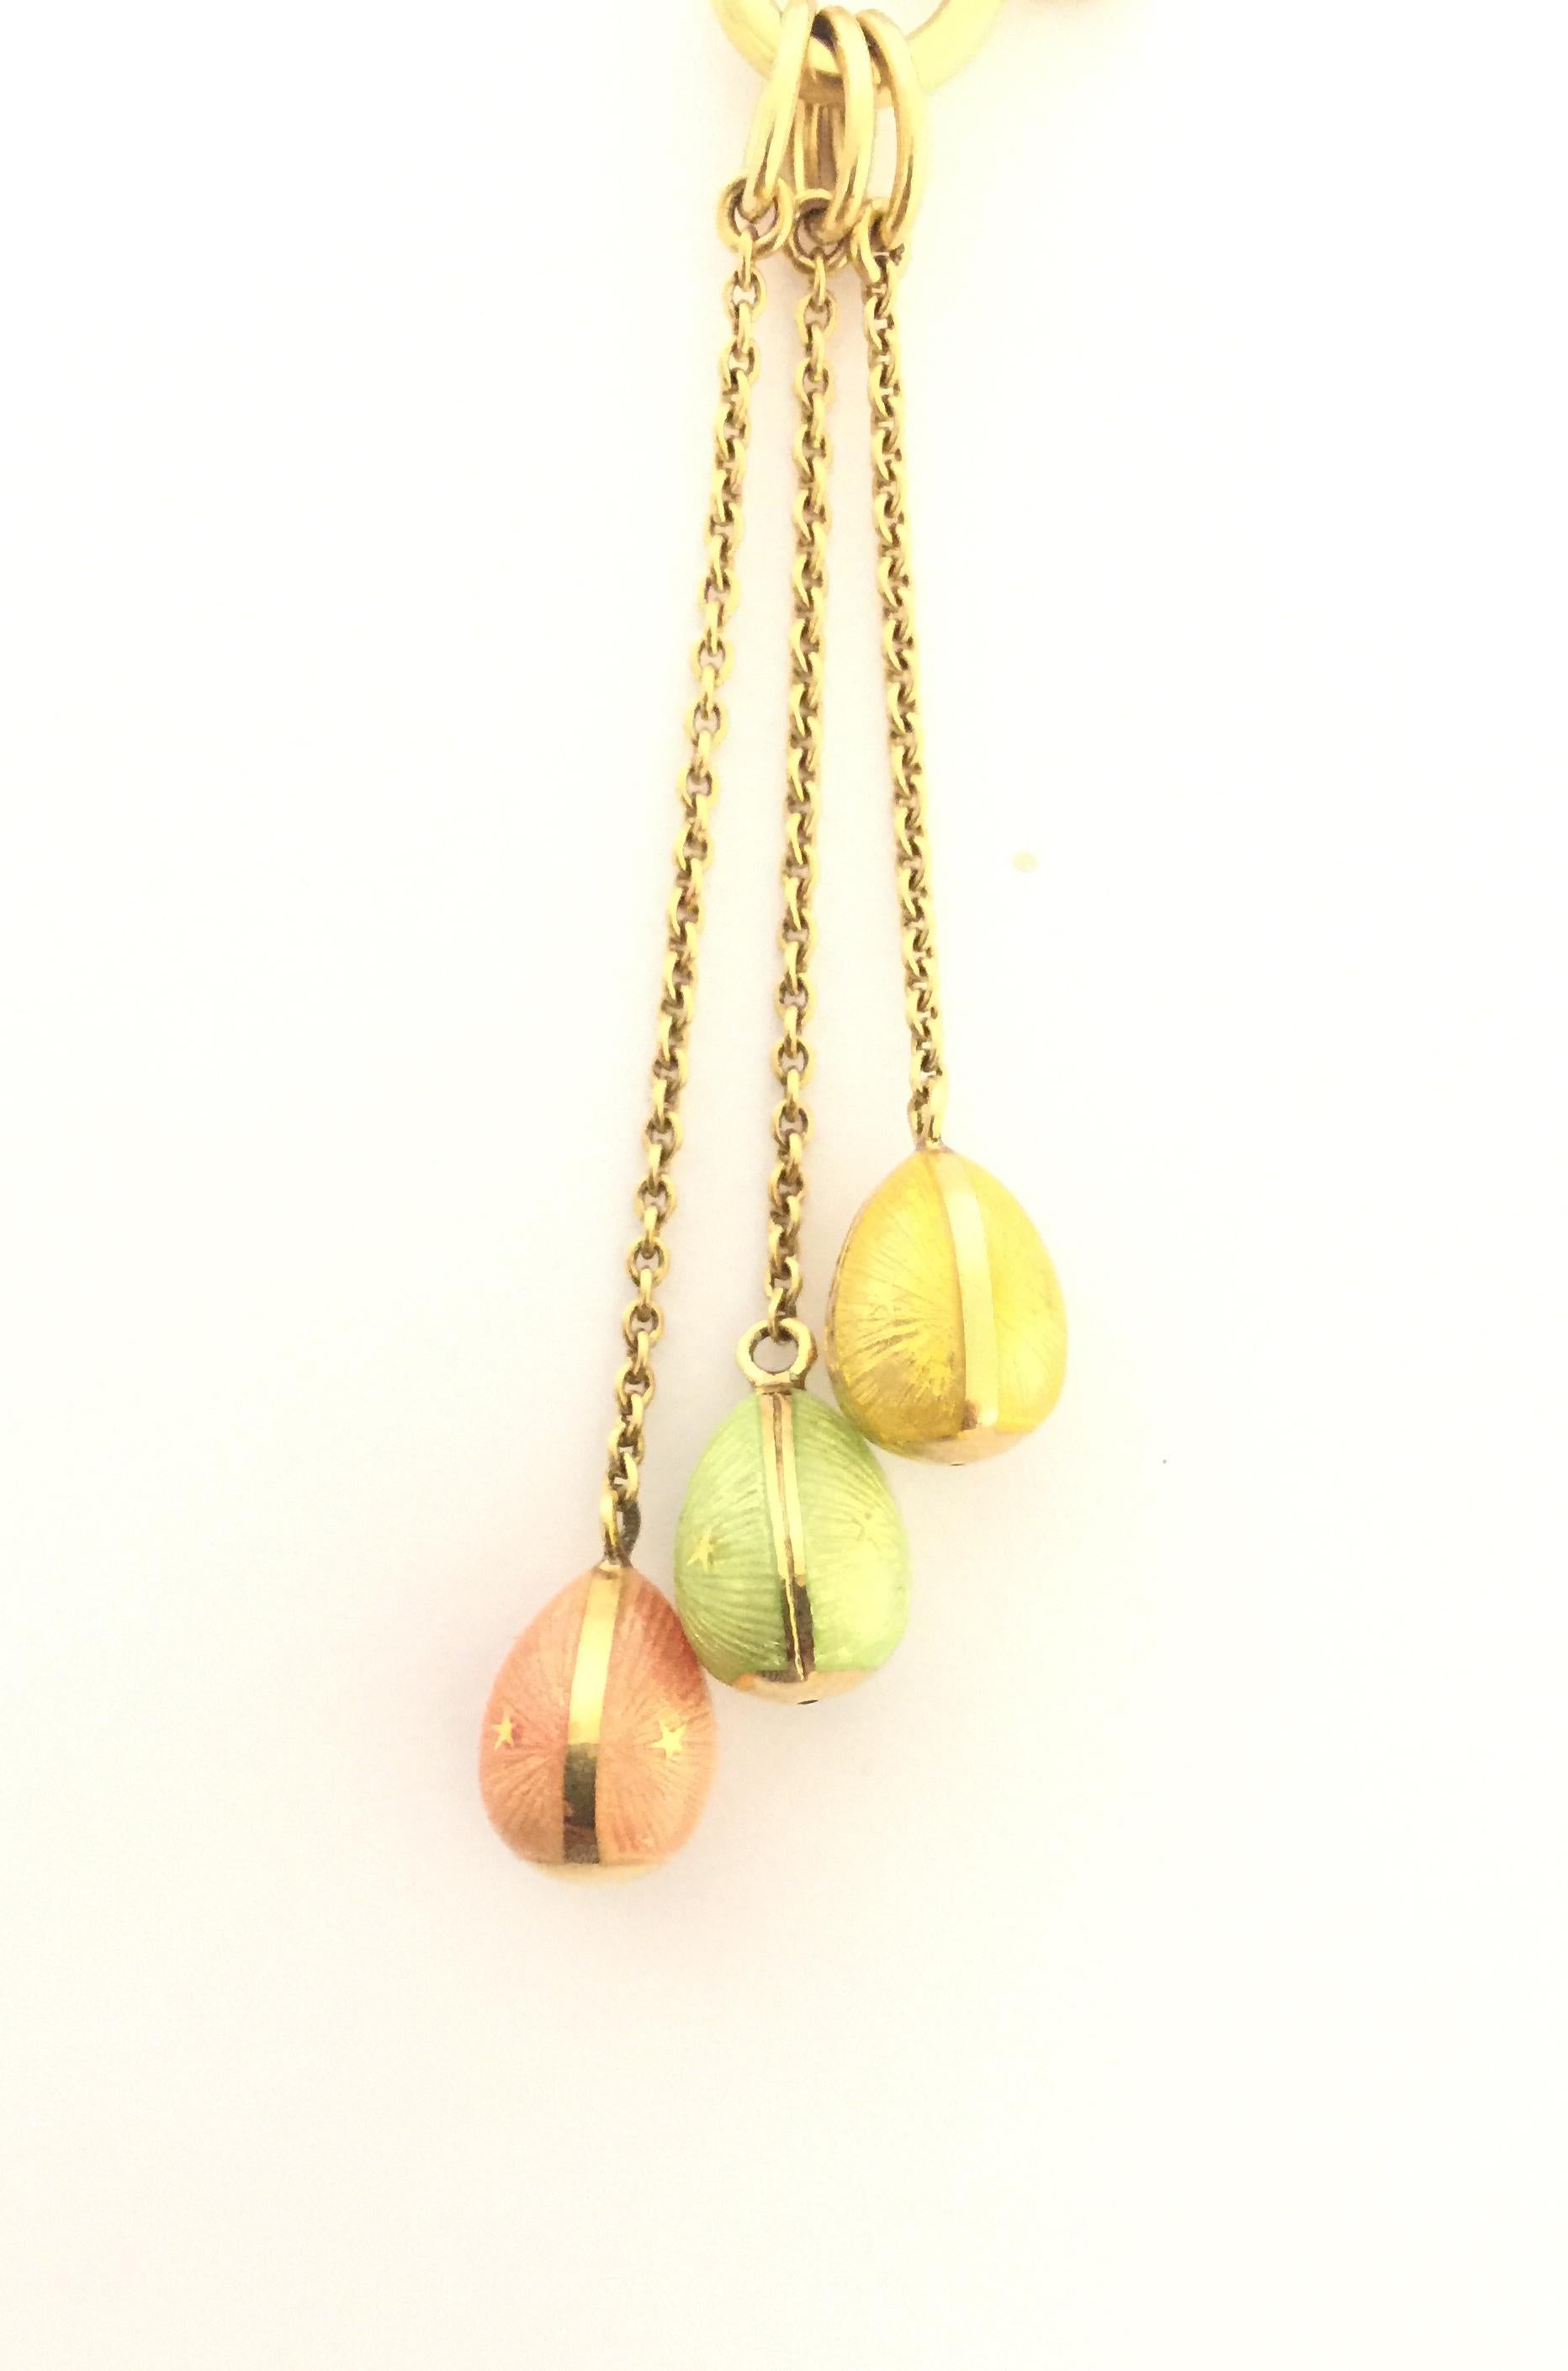 Faberge Egg charm Necklace.
18k Yellow Gold 
Orange, Yellow and Green Enamel Charm
F2506R1